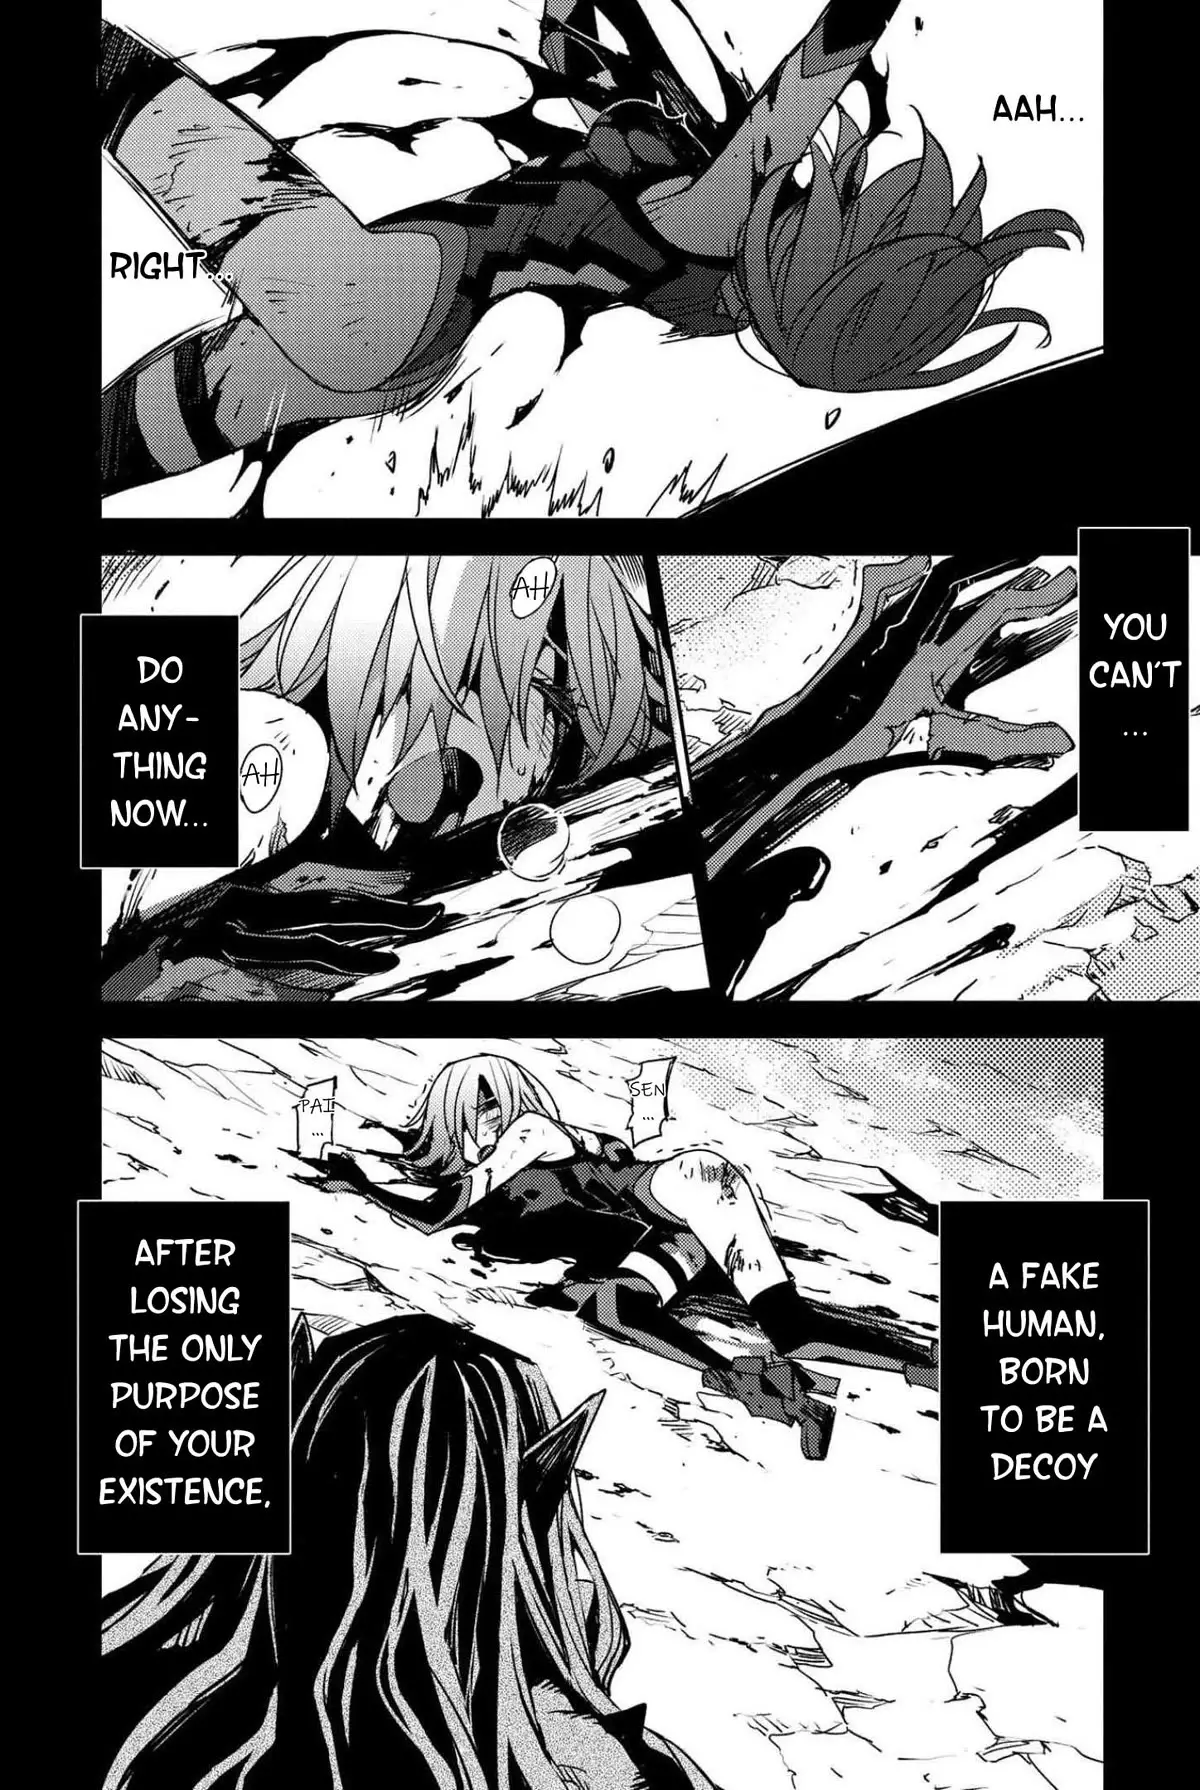 Fate/grand Order: Epic Of Remnant - Subspecies Singularity Iv: Taboo Advent Salem: Salem Of Heresy - 26 page 4-b3b4b9f6